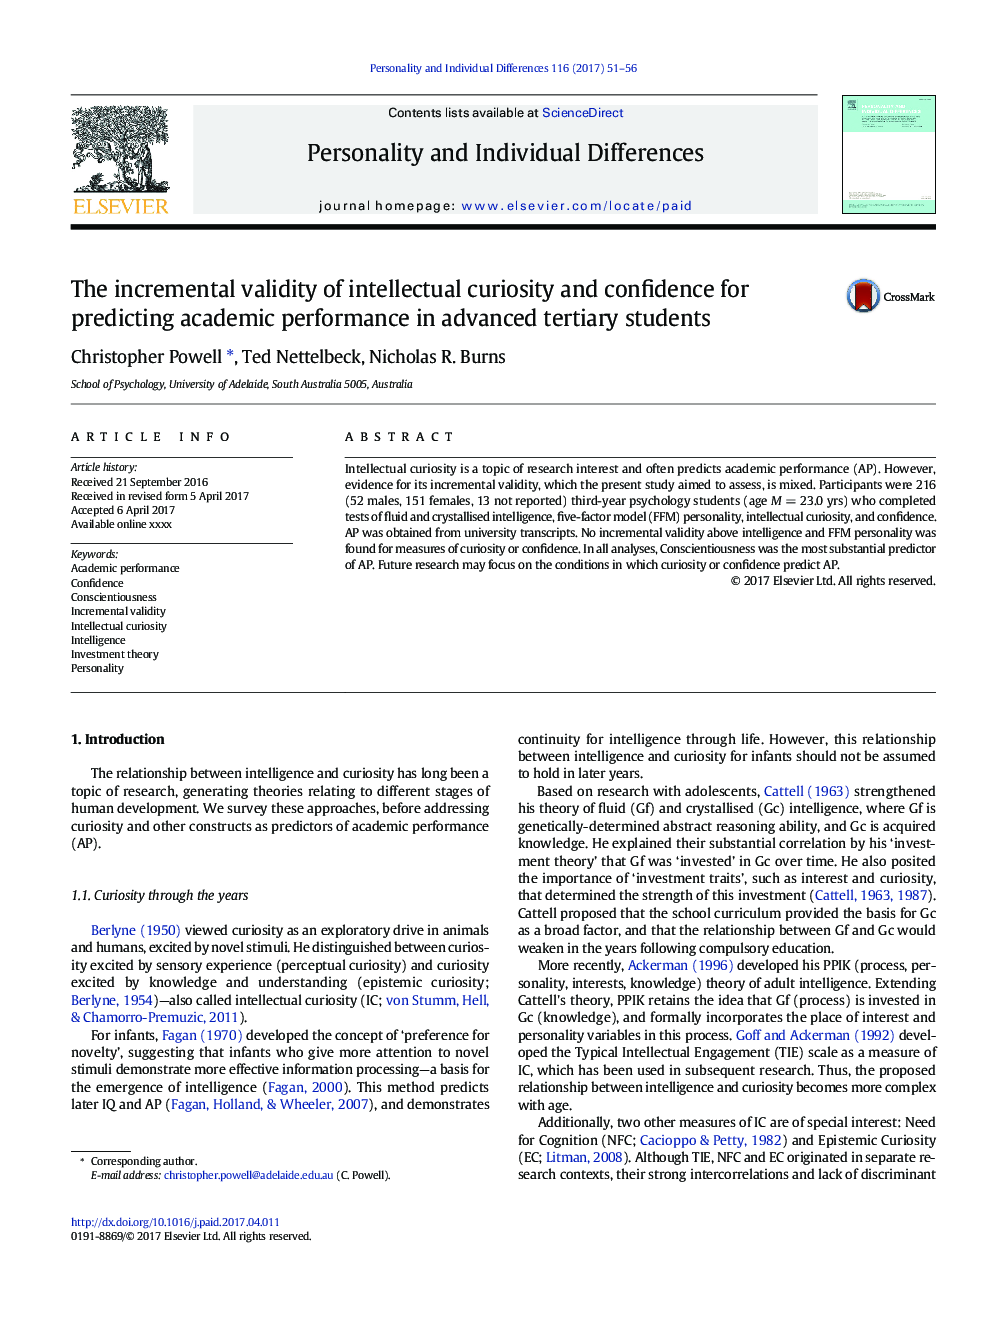 The incremental validity of intellectual curiosity and confidence for predicting academic performance in advanced tertiary students